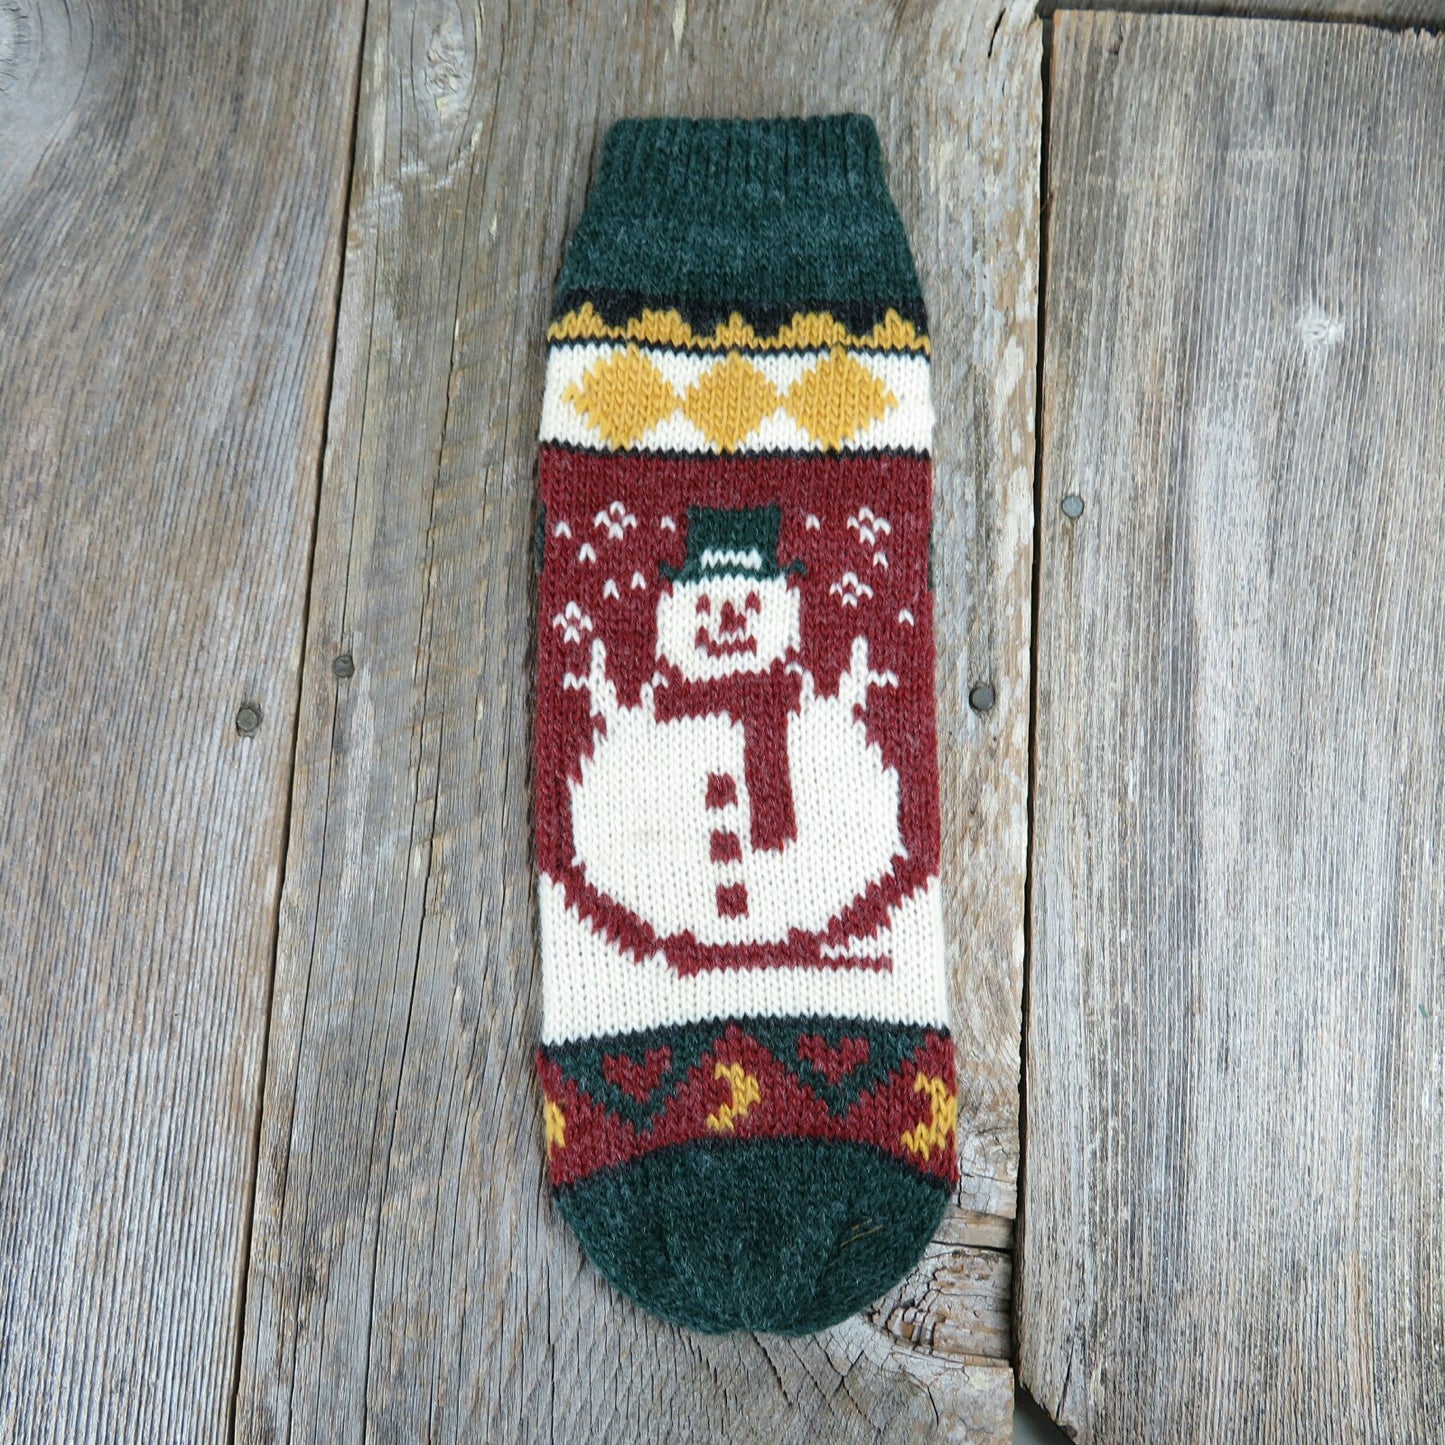 Vintage Wine or Cider Bottle Cover Stocking Knitted Knit Christmas Wool Snowman Red Green ST124 Snow Holiday Decor - At Grandma's Table